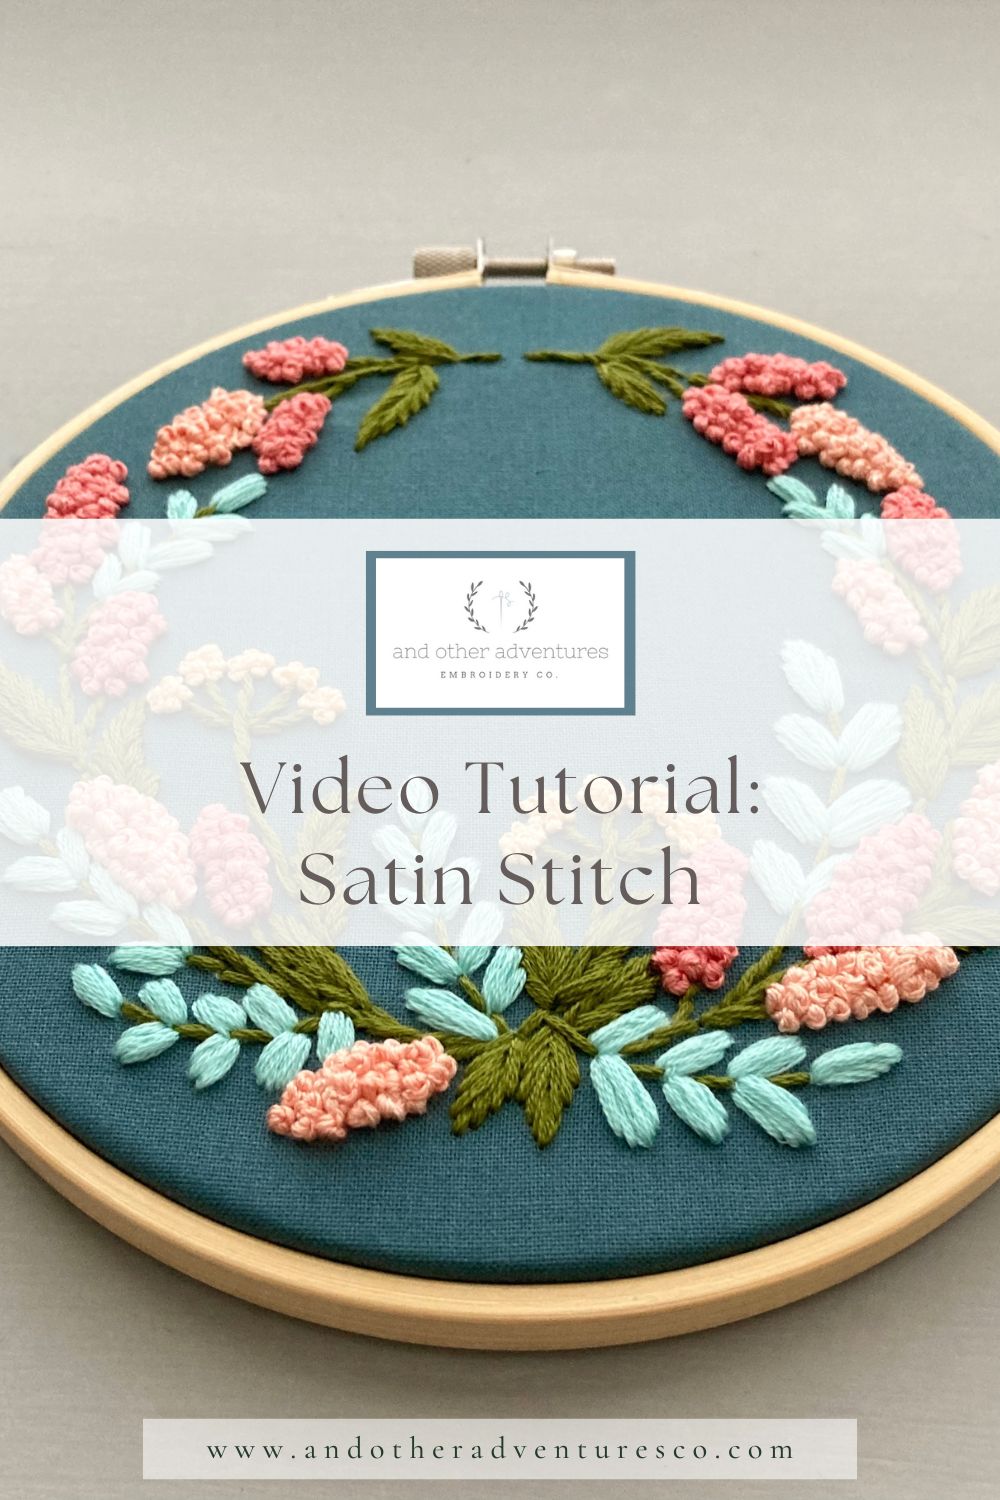 Hand Embroidery Video Tutorial - Satin Stitch by And Other Adventures Embroidery Co